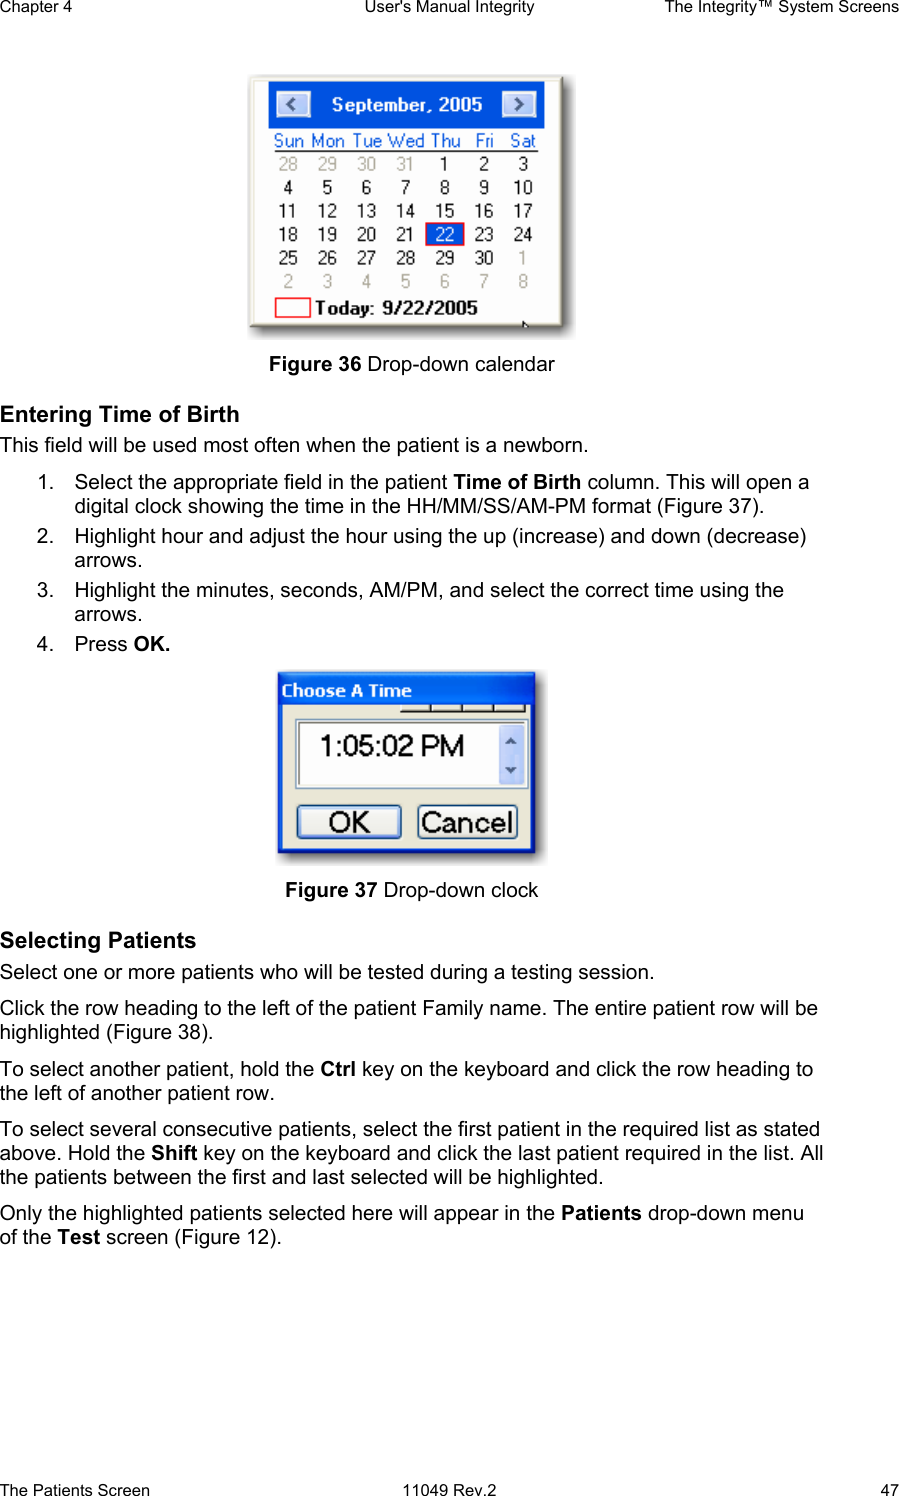 Chapter 4  User&apos;s Manual Integrity  The Integrity™ System Screens The Patients Screen  11049 Rev.2  47                     Figure 36 Drop-down calendar Entering Time of Birth This field will be used most often when the patient is a newborn.  1.  Select the appropriate field in the patient Time of Birth column. This will open a digital clock showing the time in the HH/MM/SS/AM-PM format (Figure 37).  2.  Highlight hour and adjust the hour using the up (increase) and down (decrease) arrows. 3.  Highlight the minutes, seconds, AM/PM, and select the correct time using the arrows. 4. Press OK.  Figure 37 Drop-down clock Selecting Patients Select one or more patients who will be tested during a testing session.  Click the row heading to the left of the patient Family name. The entire patient row will be highlighted (Figure 38).  To select another patient, hold the Ctrl key on the keyboard and click the row heading to the left of another patient row. To select several consecutive patients, select the first patient in the required list as stated above. Hold the Shift key on the keyboard and click the last patient required in the list. All the patients between the first and last selected will be highlighted. Only the highlighted patients selected here will appear in the Patients drop-down menu of the Test screen (Figure 12).  